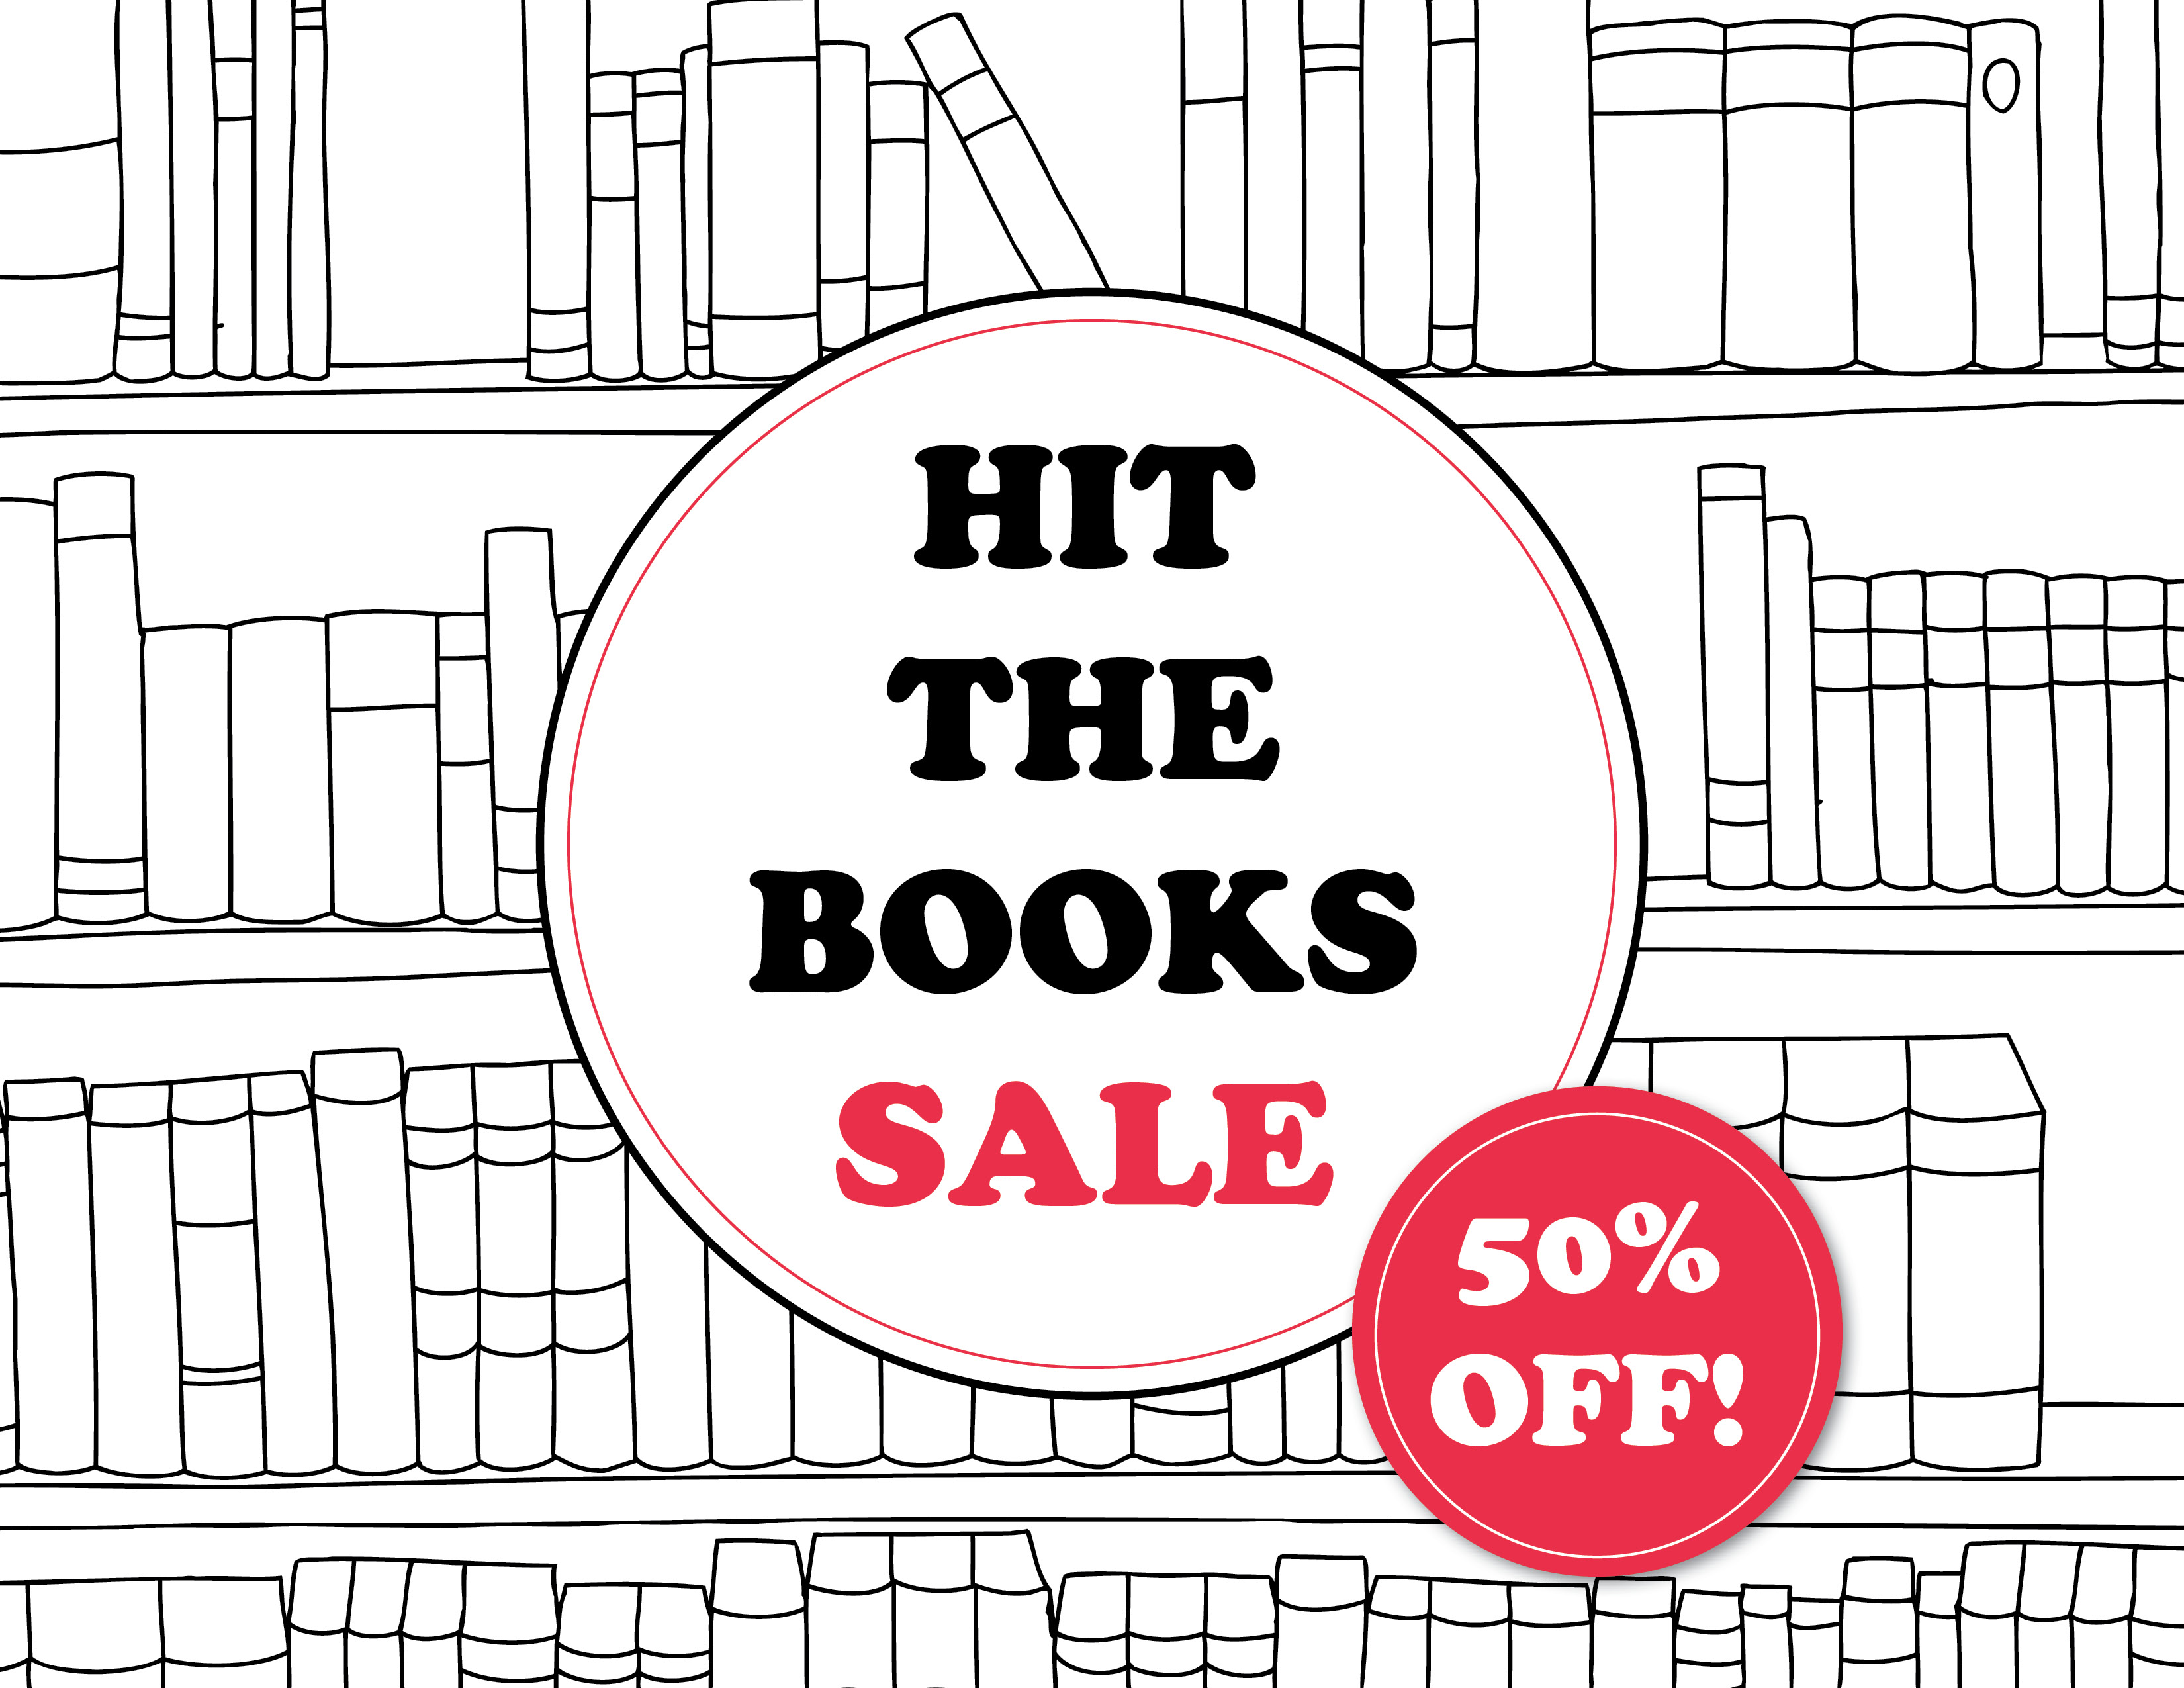 Hundreds of provocative titles at 50% off!